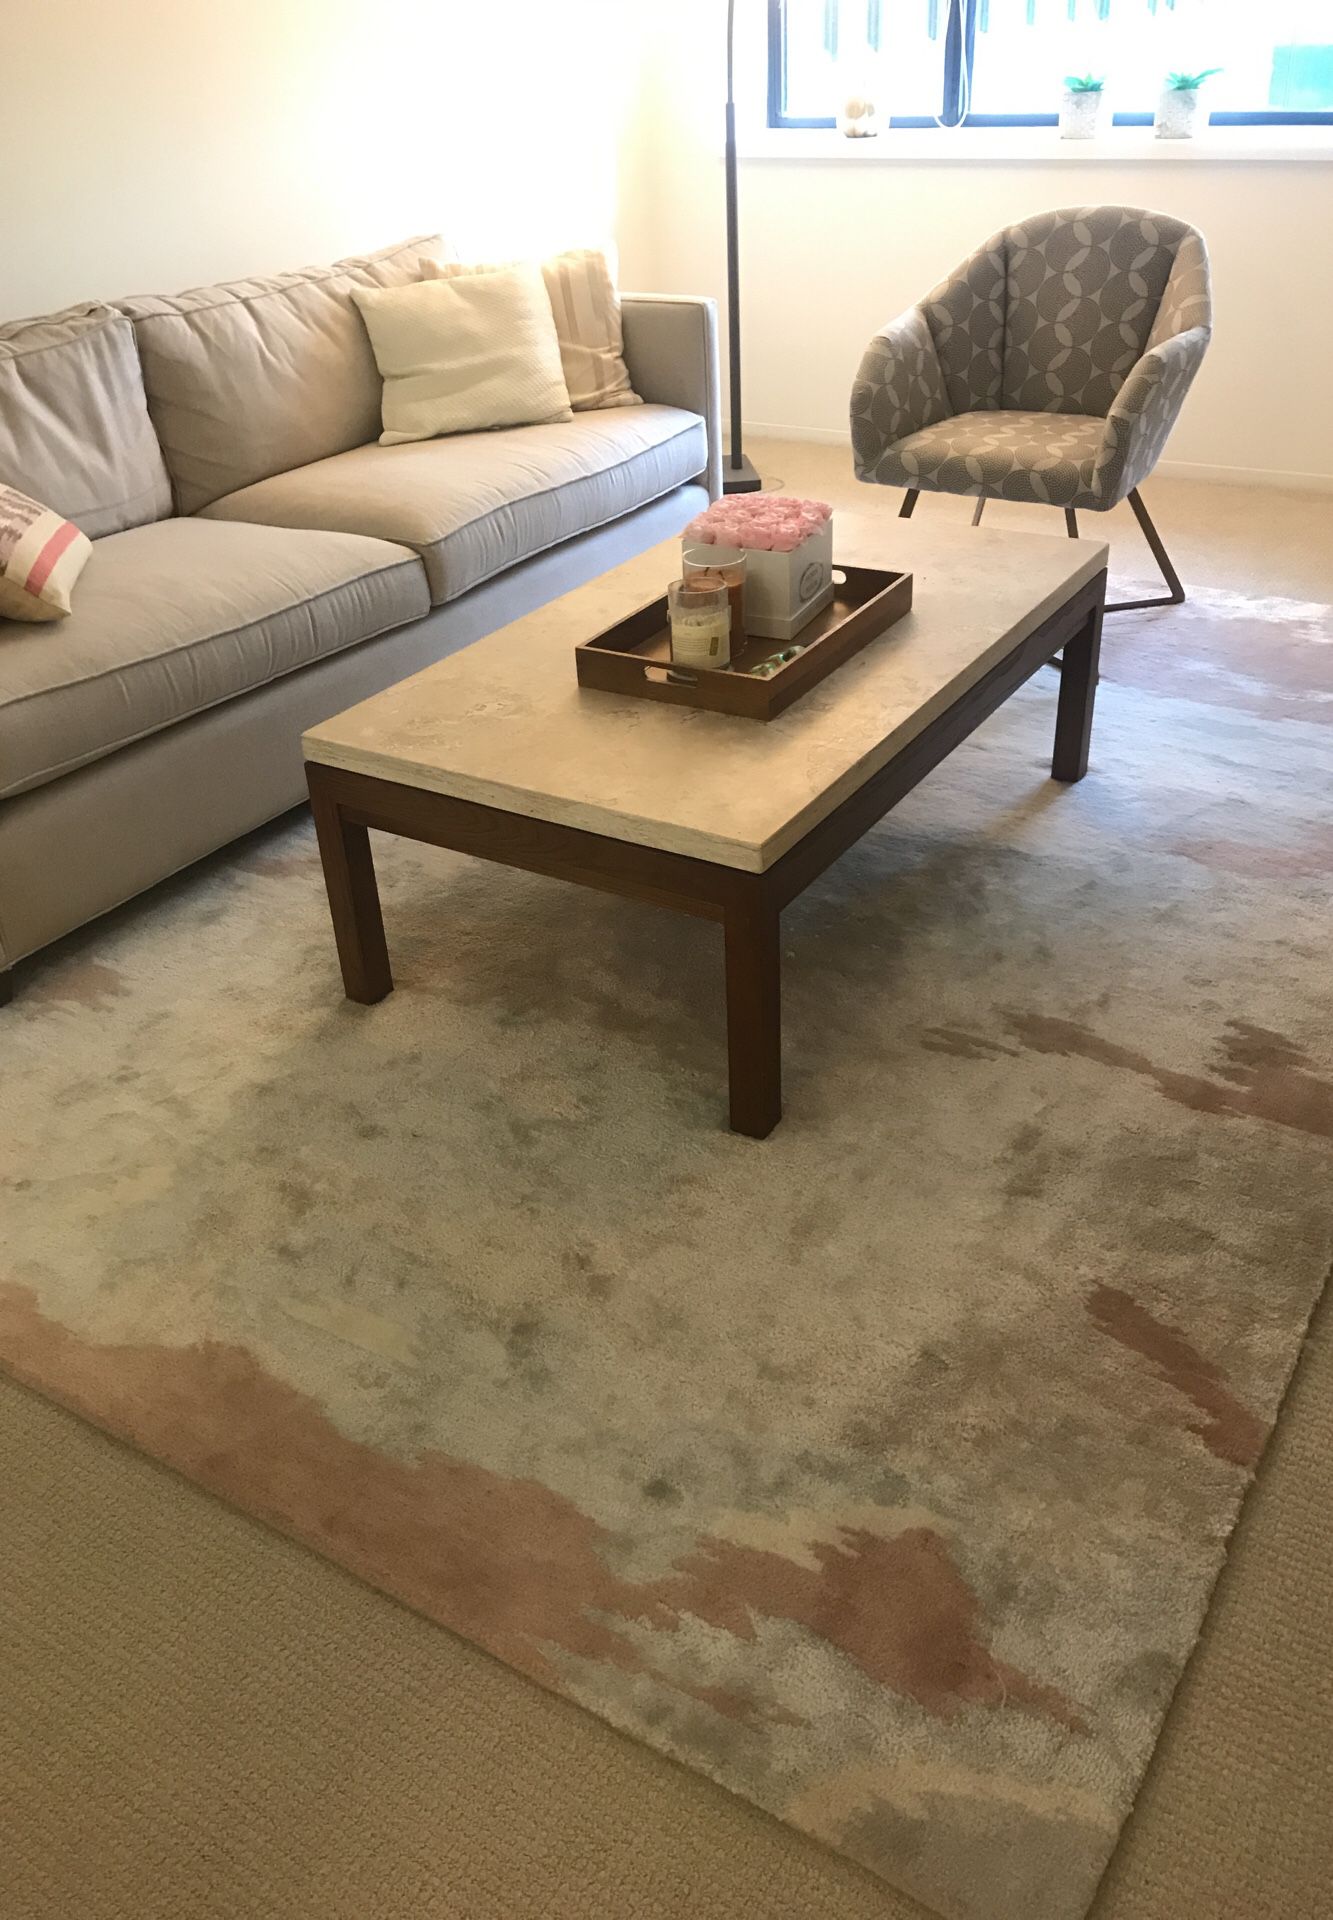 Rug from west elm